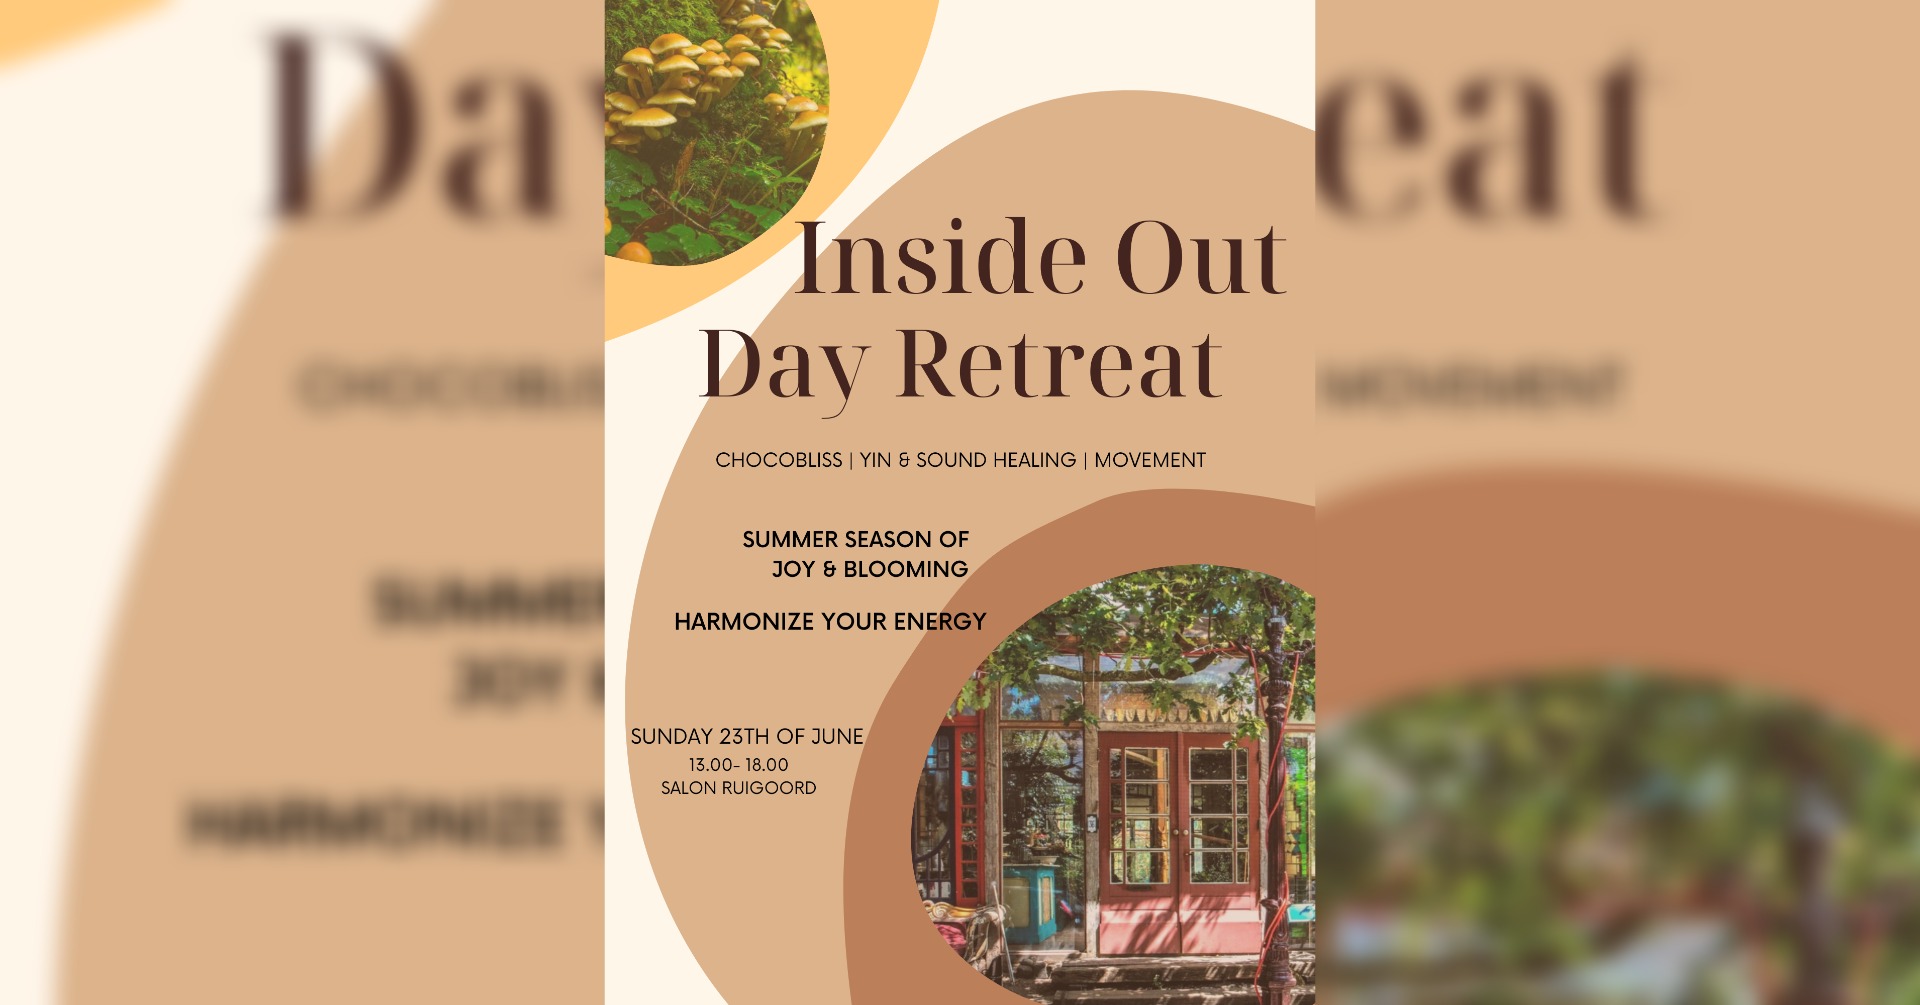 Inside Out One day Retreat @Ruigoord Salon